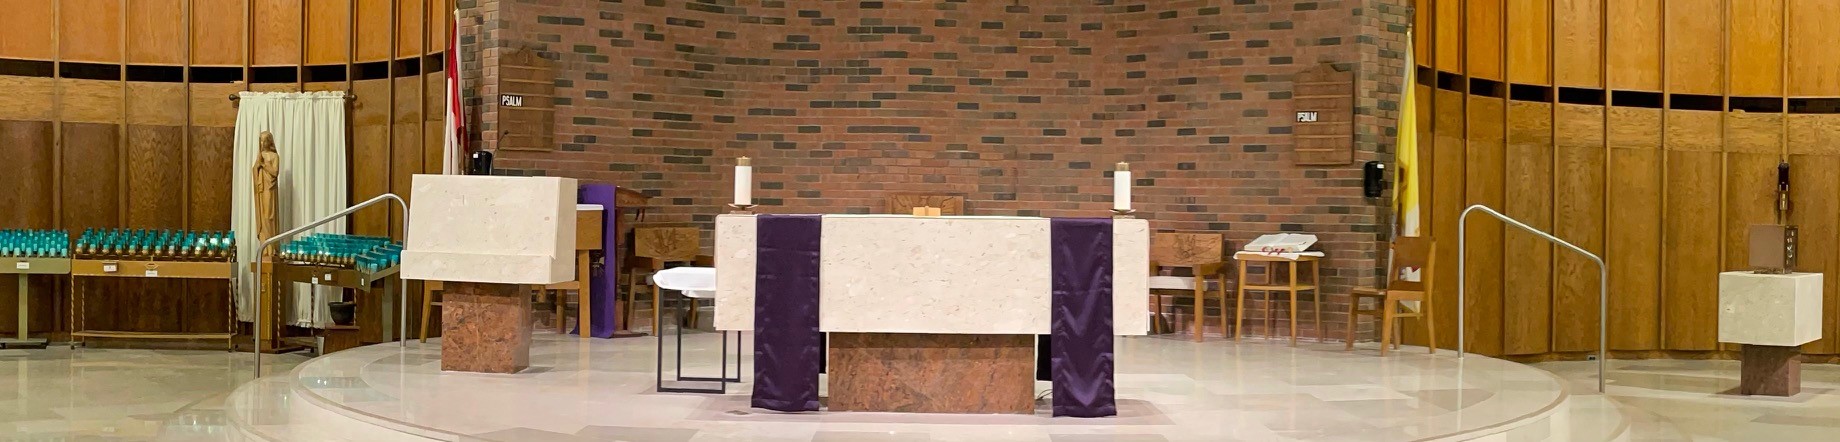 St. Mary's Parish in Barrie Ontario Altar in Lent 2021